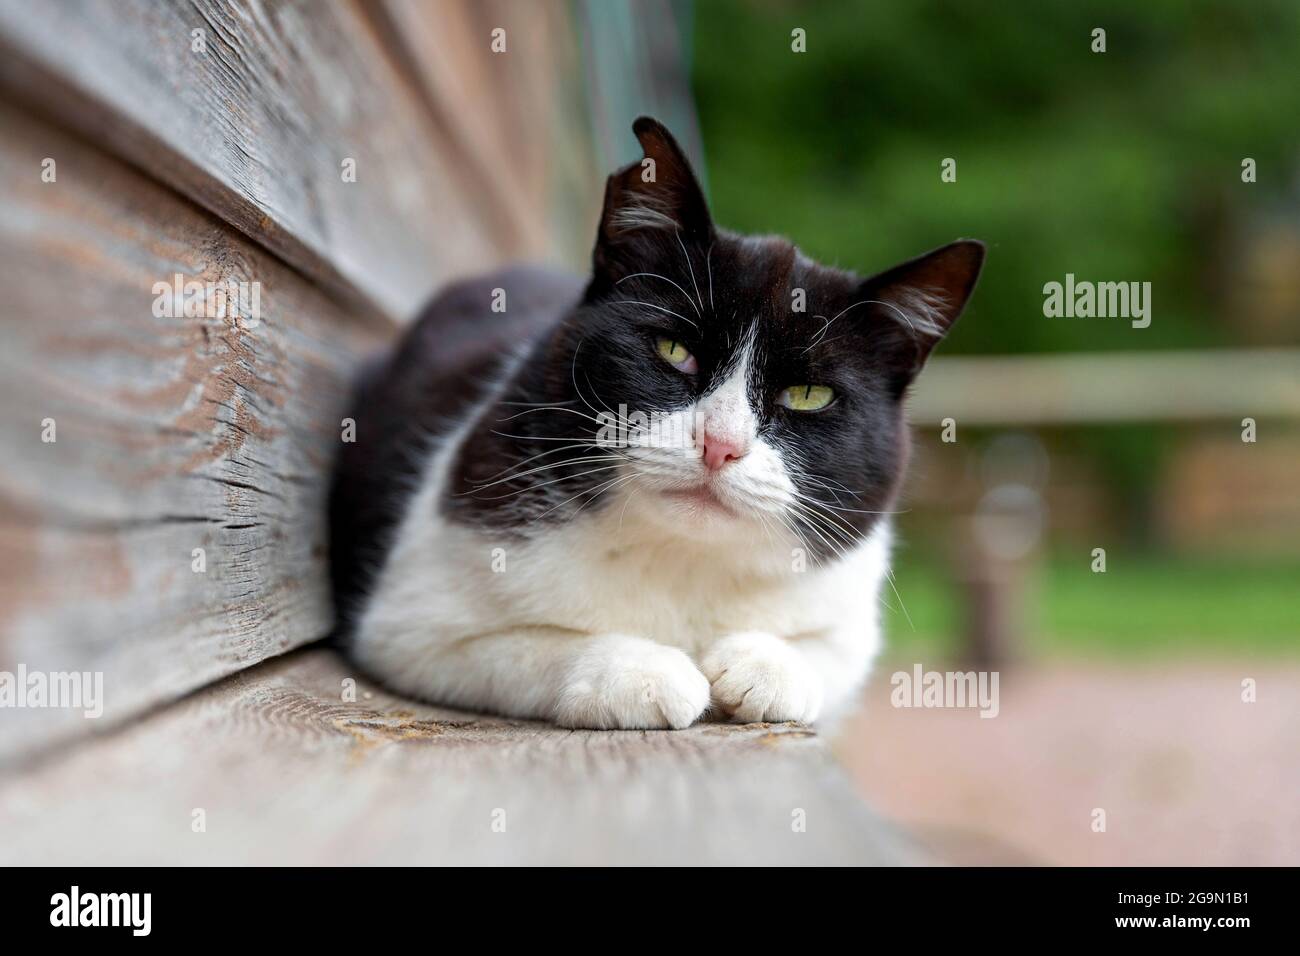 Black and white cat resting Stock Photo